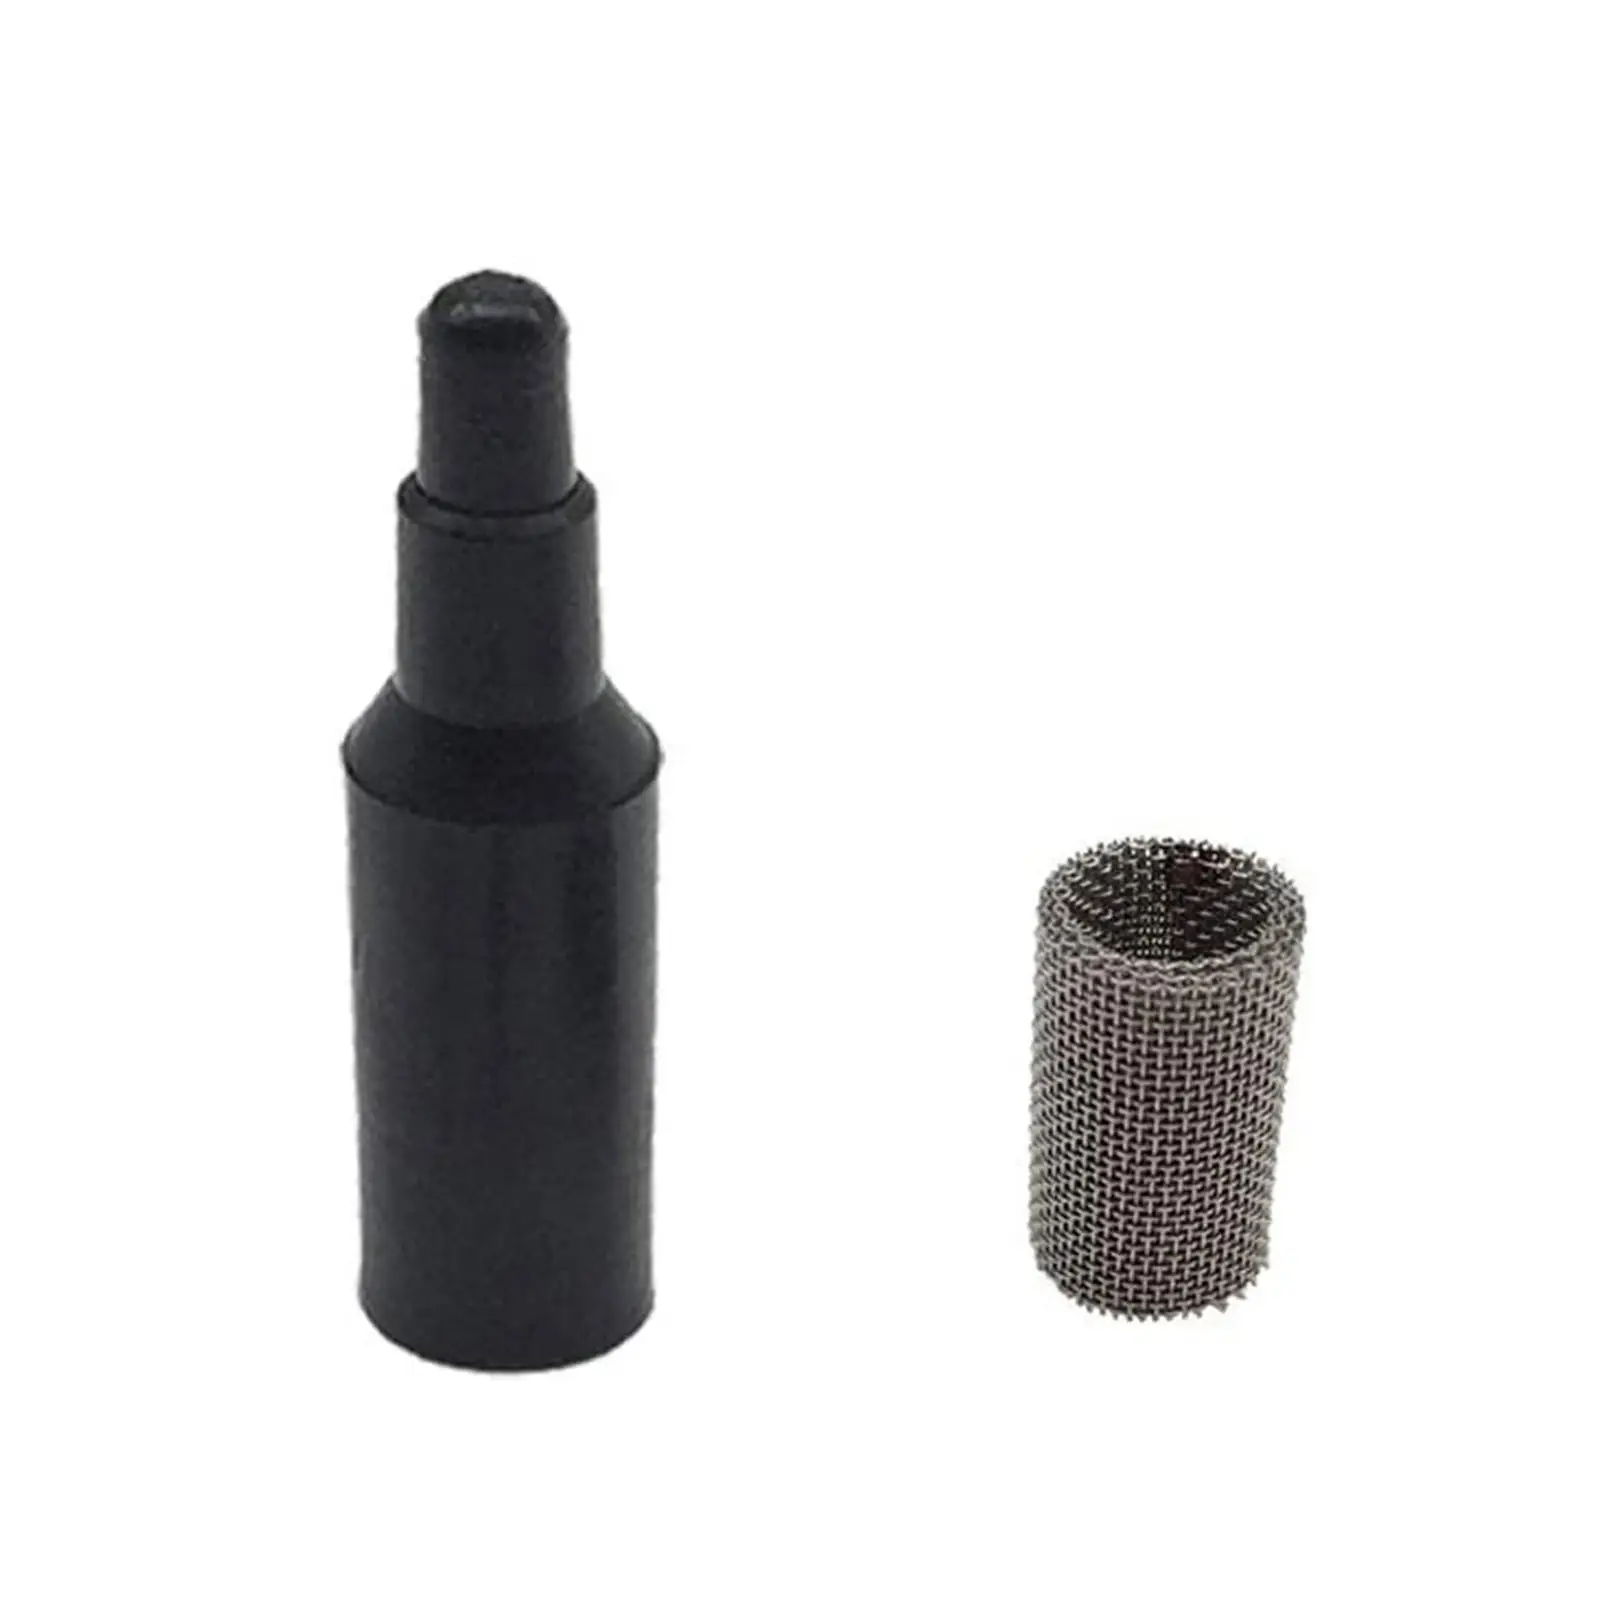 Glow Plug Repair Kit Replacement Net Sturdy for 12V 5kW Parking Heater